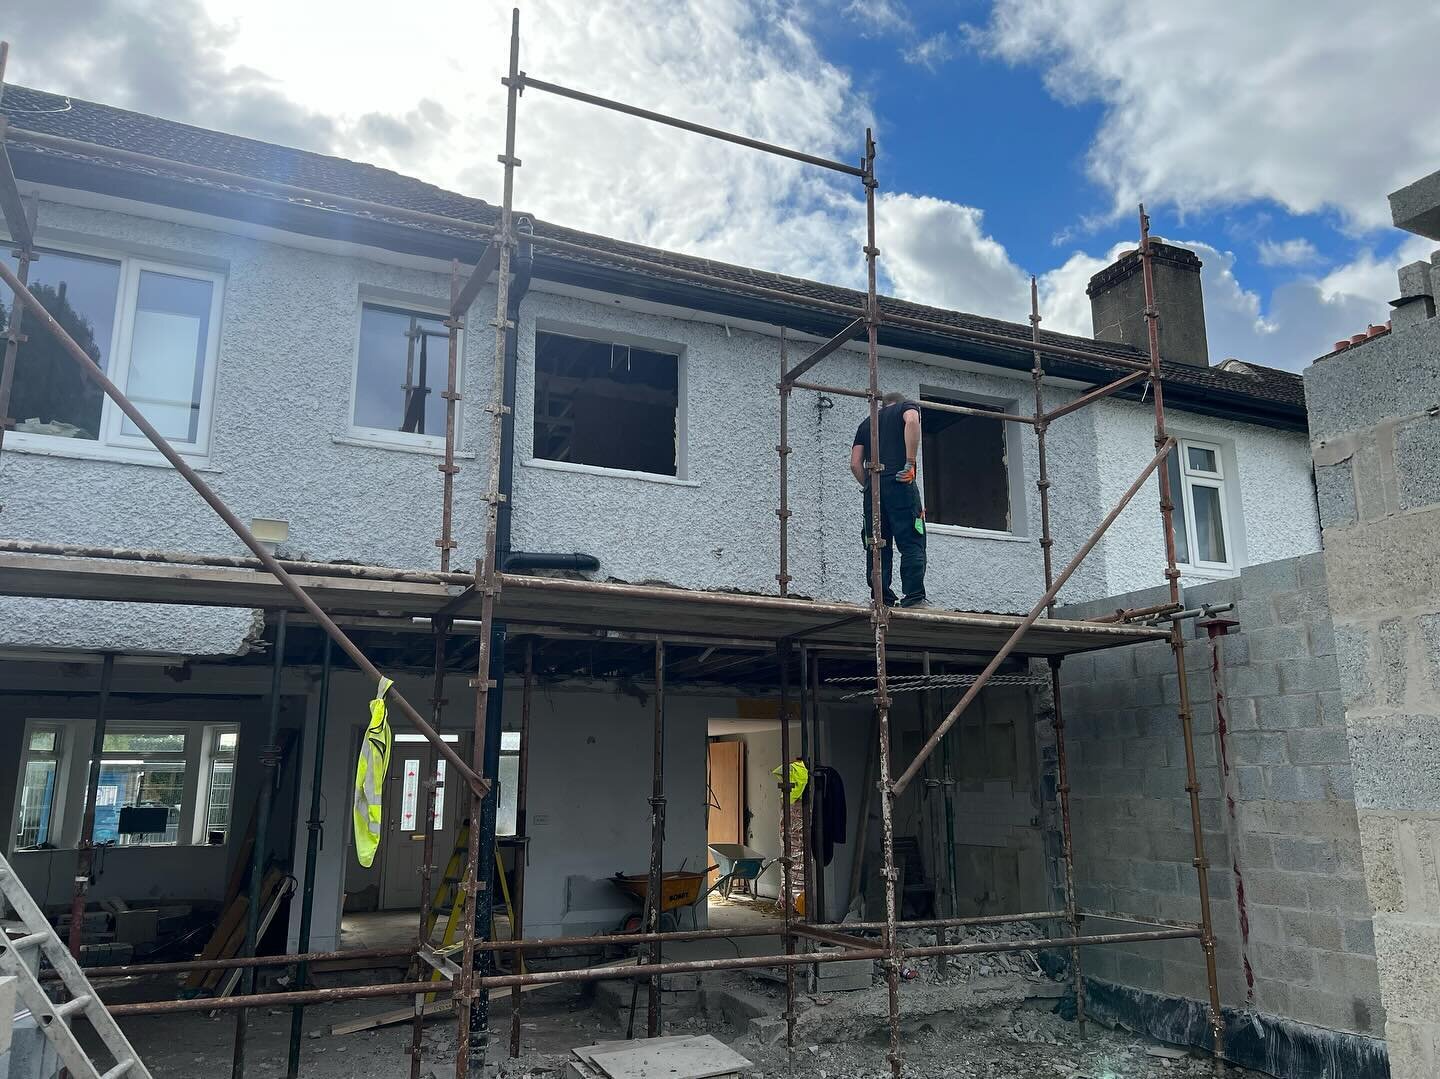 Progress photos of our project in Blackrock 🏠

- Removal of back wall to allow for steel frame construction of extension. Steel was used as it is quick to erect, highly durable, flexible and sustainable
- Steel is then fitted and tied in with the ex